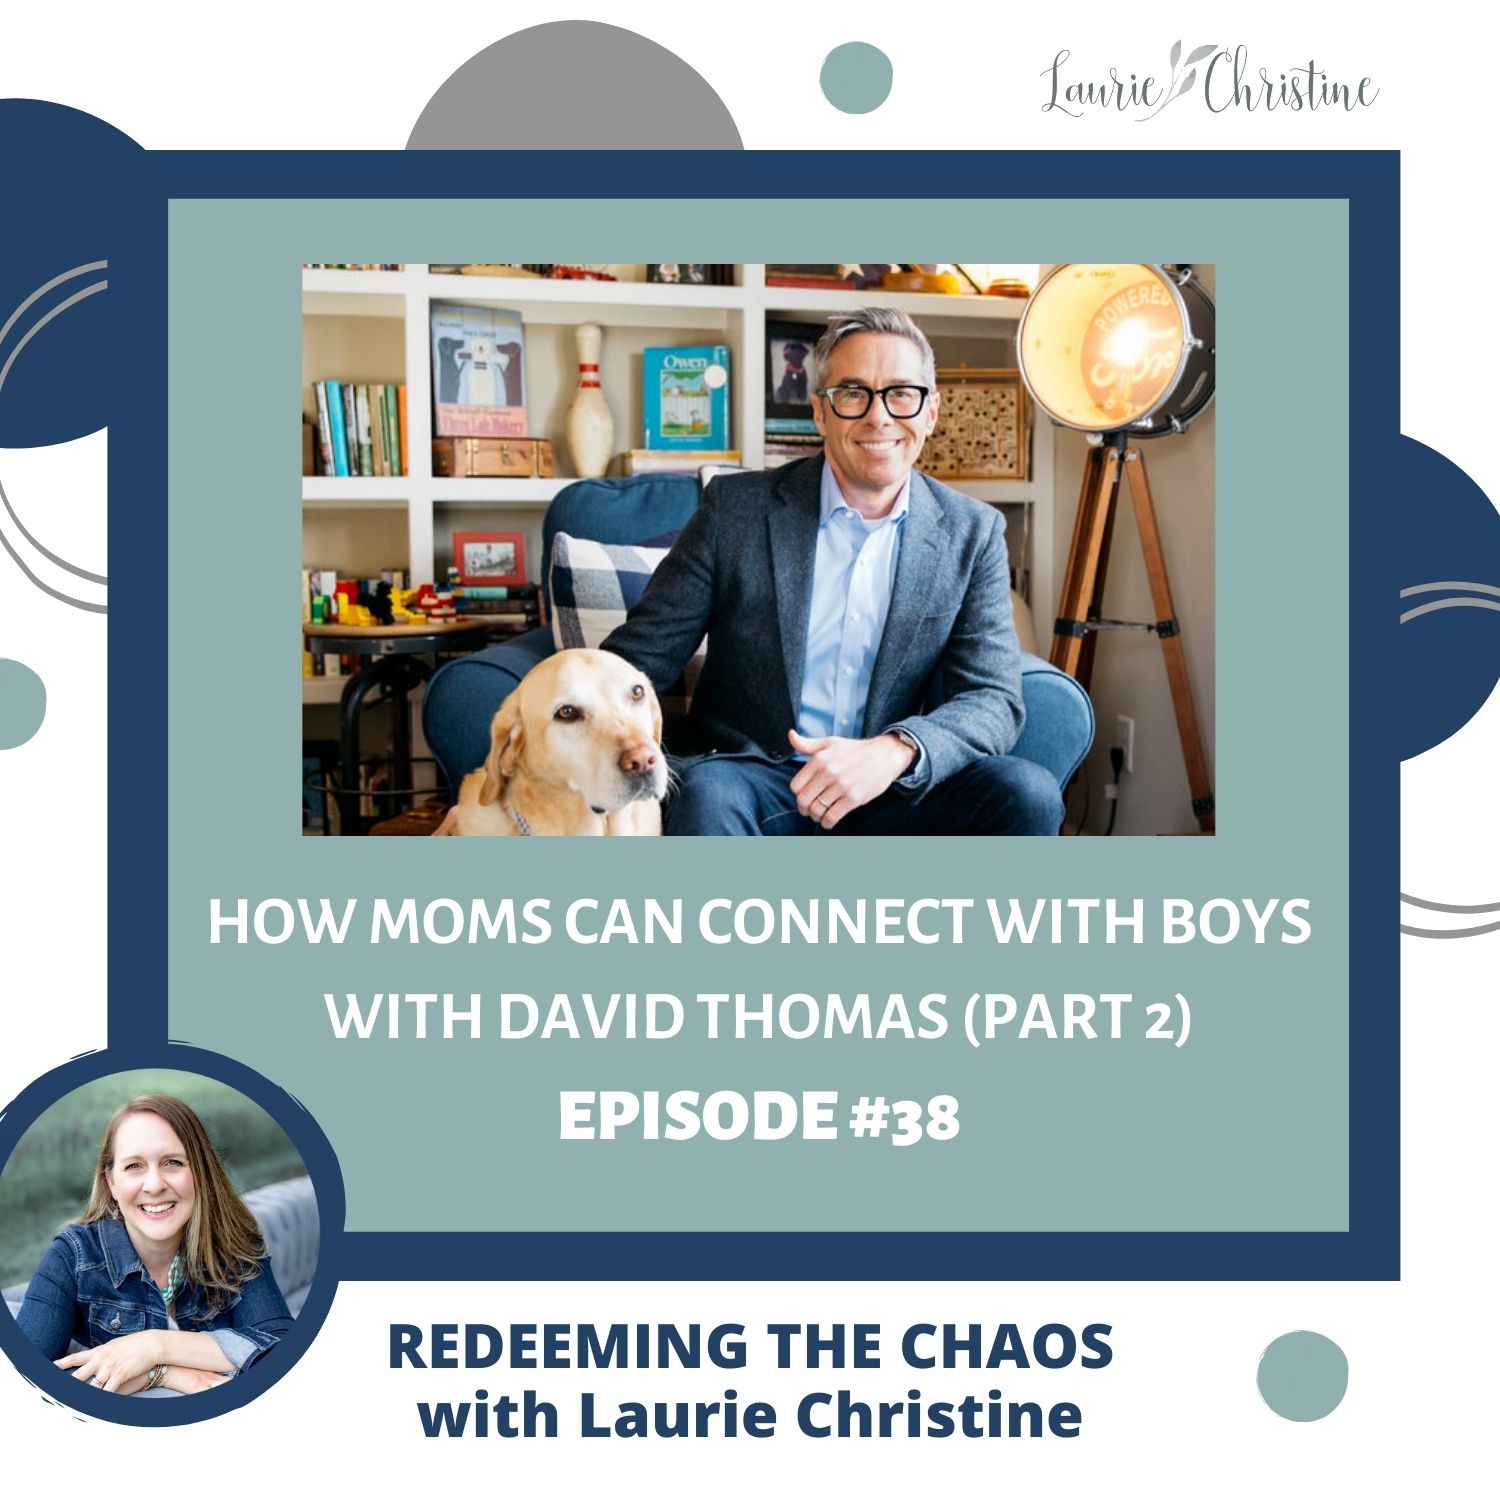 How can Moms Connect With Their Boys? Interview with David Thomas (part 2)